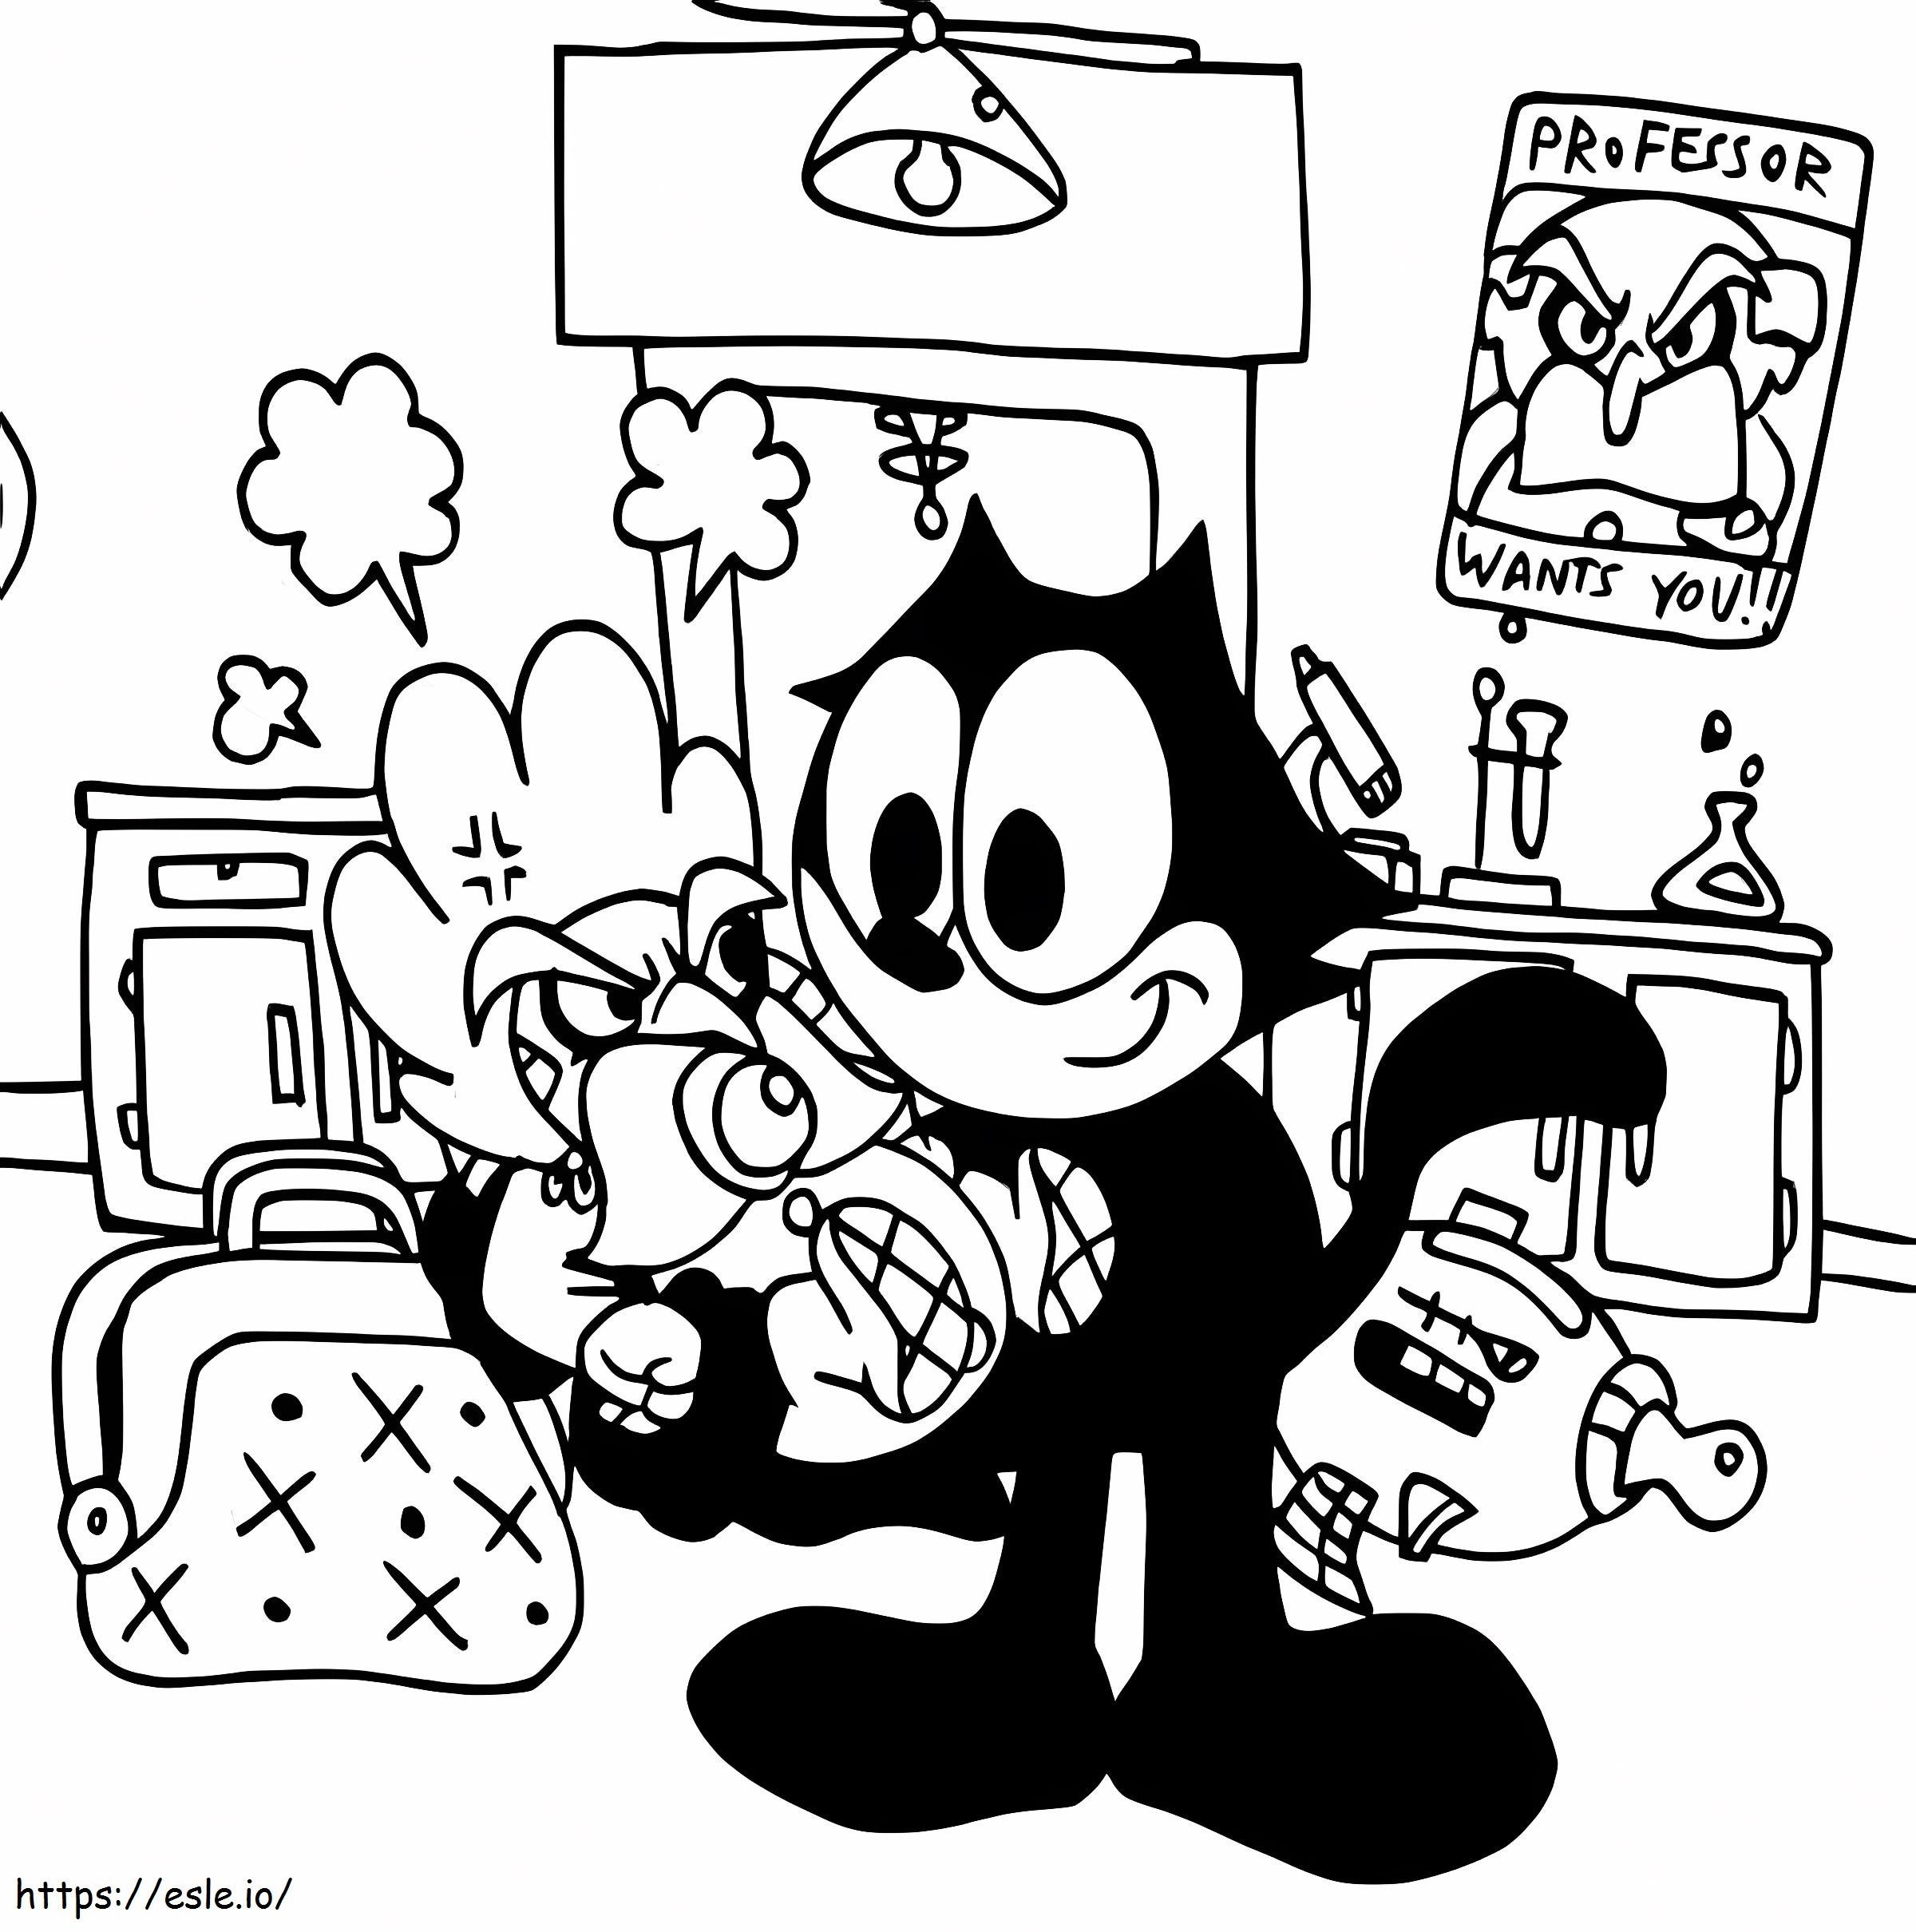 Felix The Cat And Baby Professor coloring page